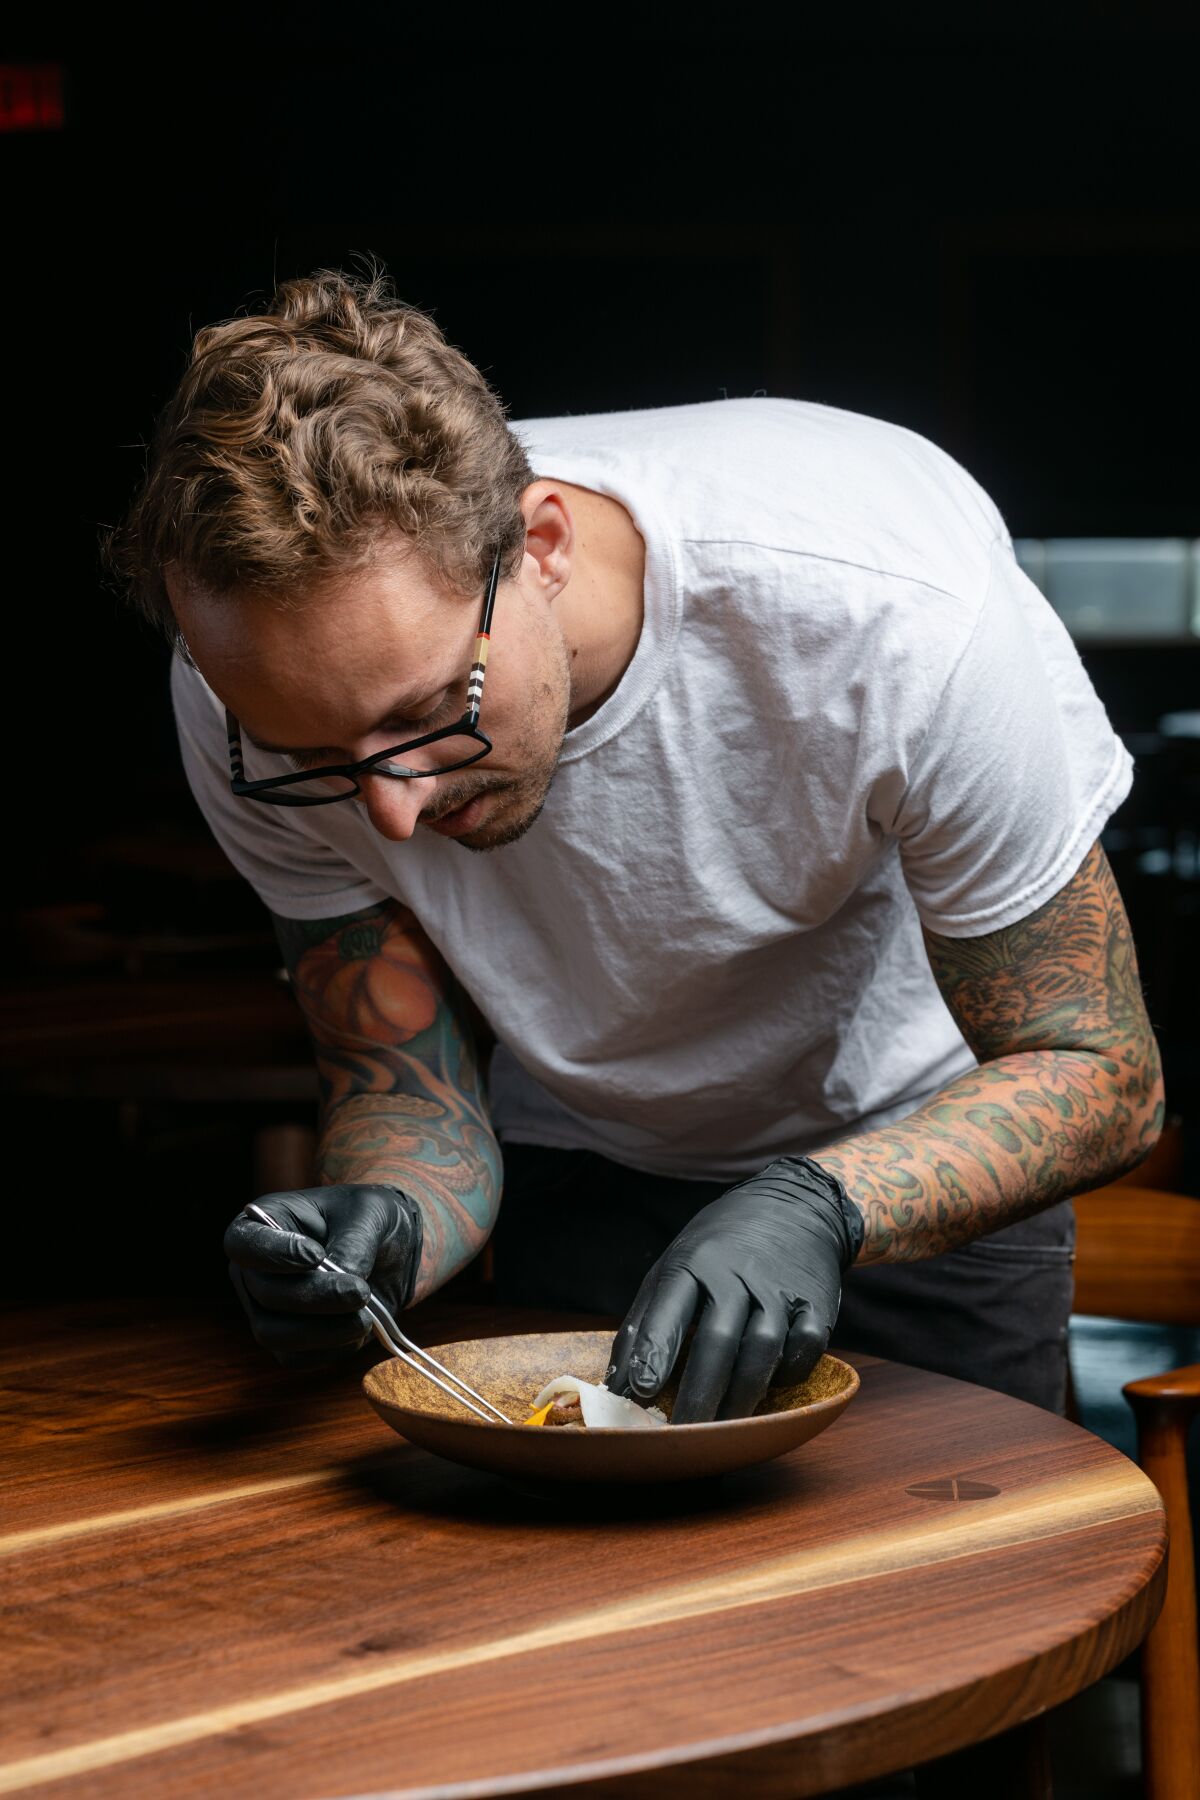 Chef-owner William Eick plates his cuttlefish dish for his new 10-course tasting menu at Matsu restaurant in Oceanside.